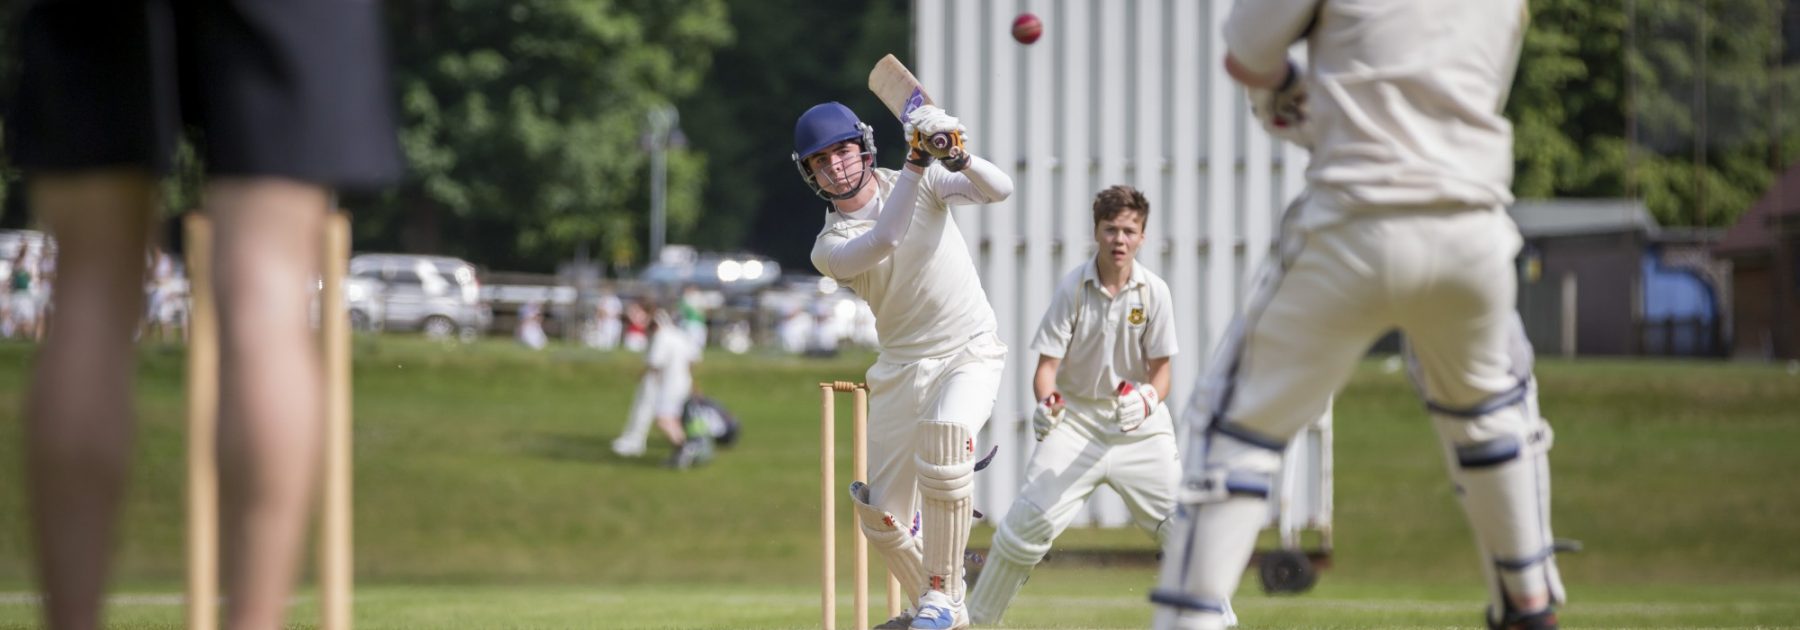 Third Year of Selection for The Cricketer Schools Guide